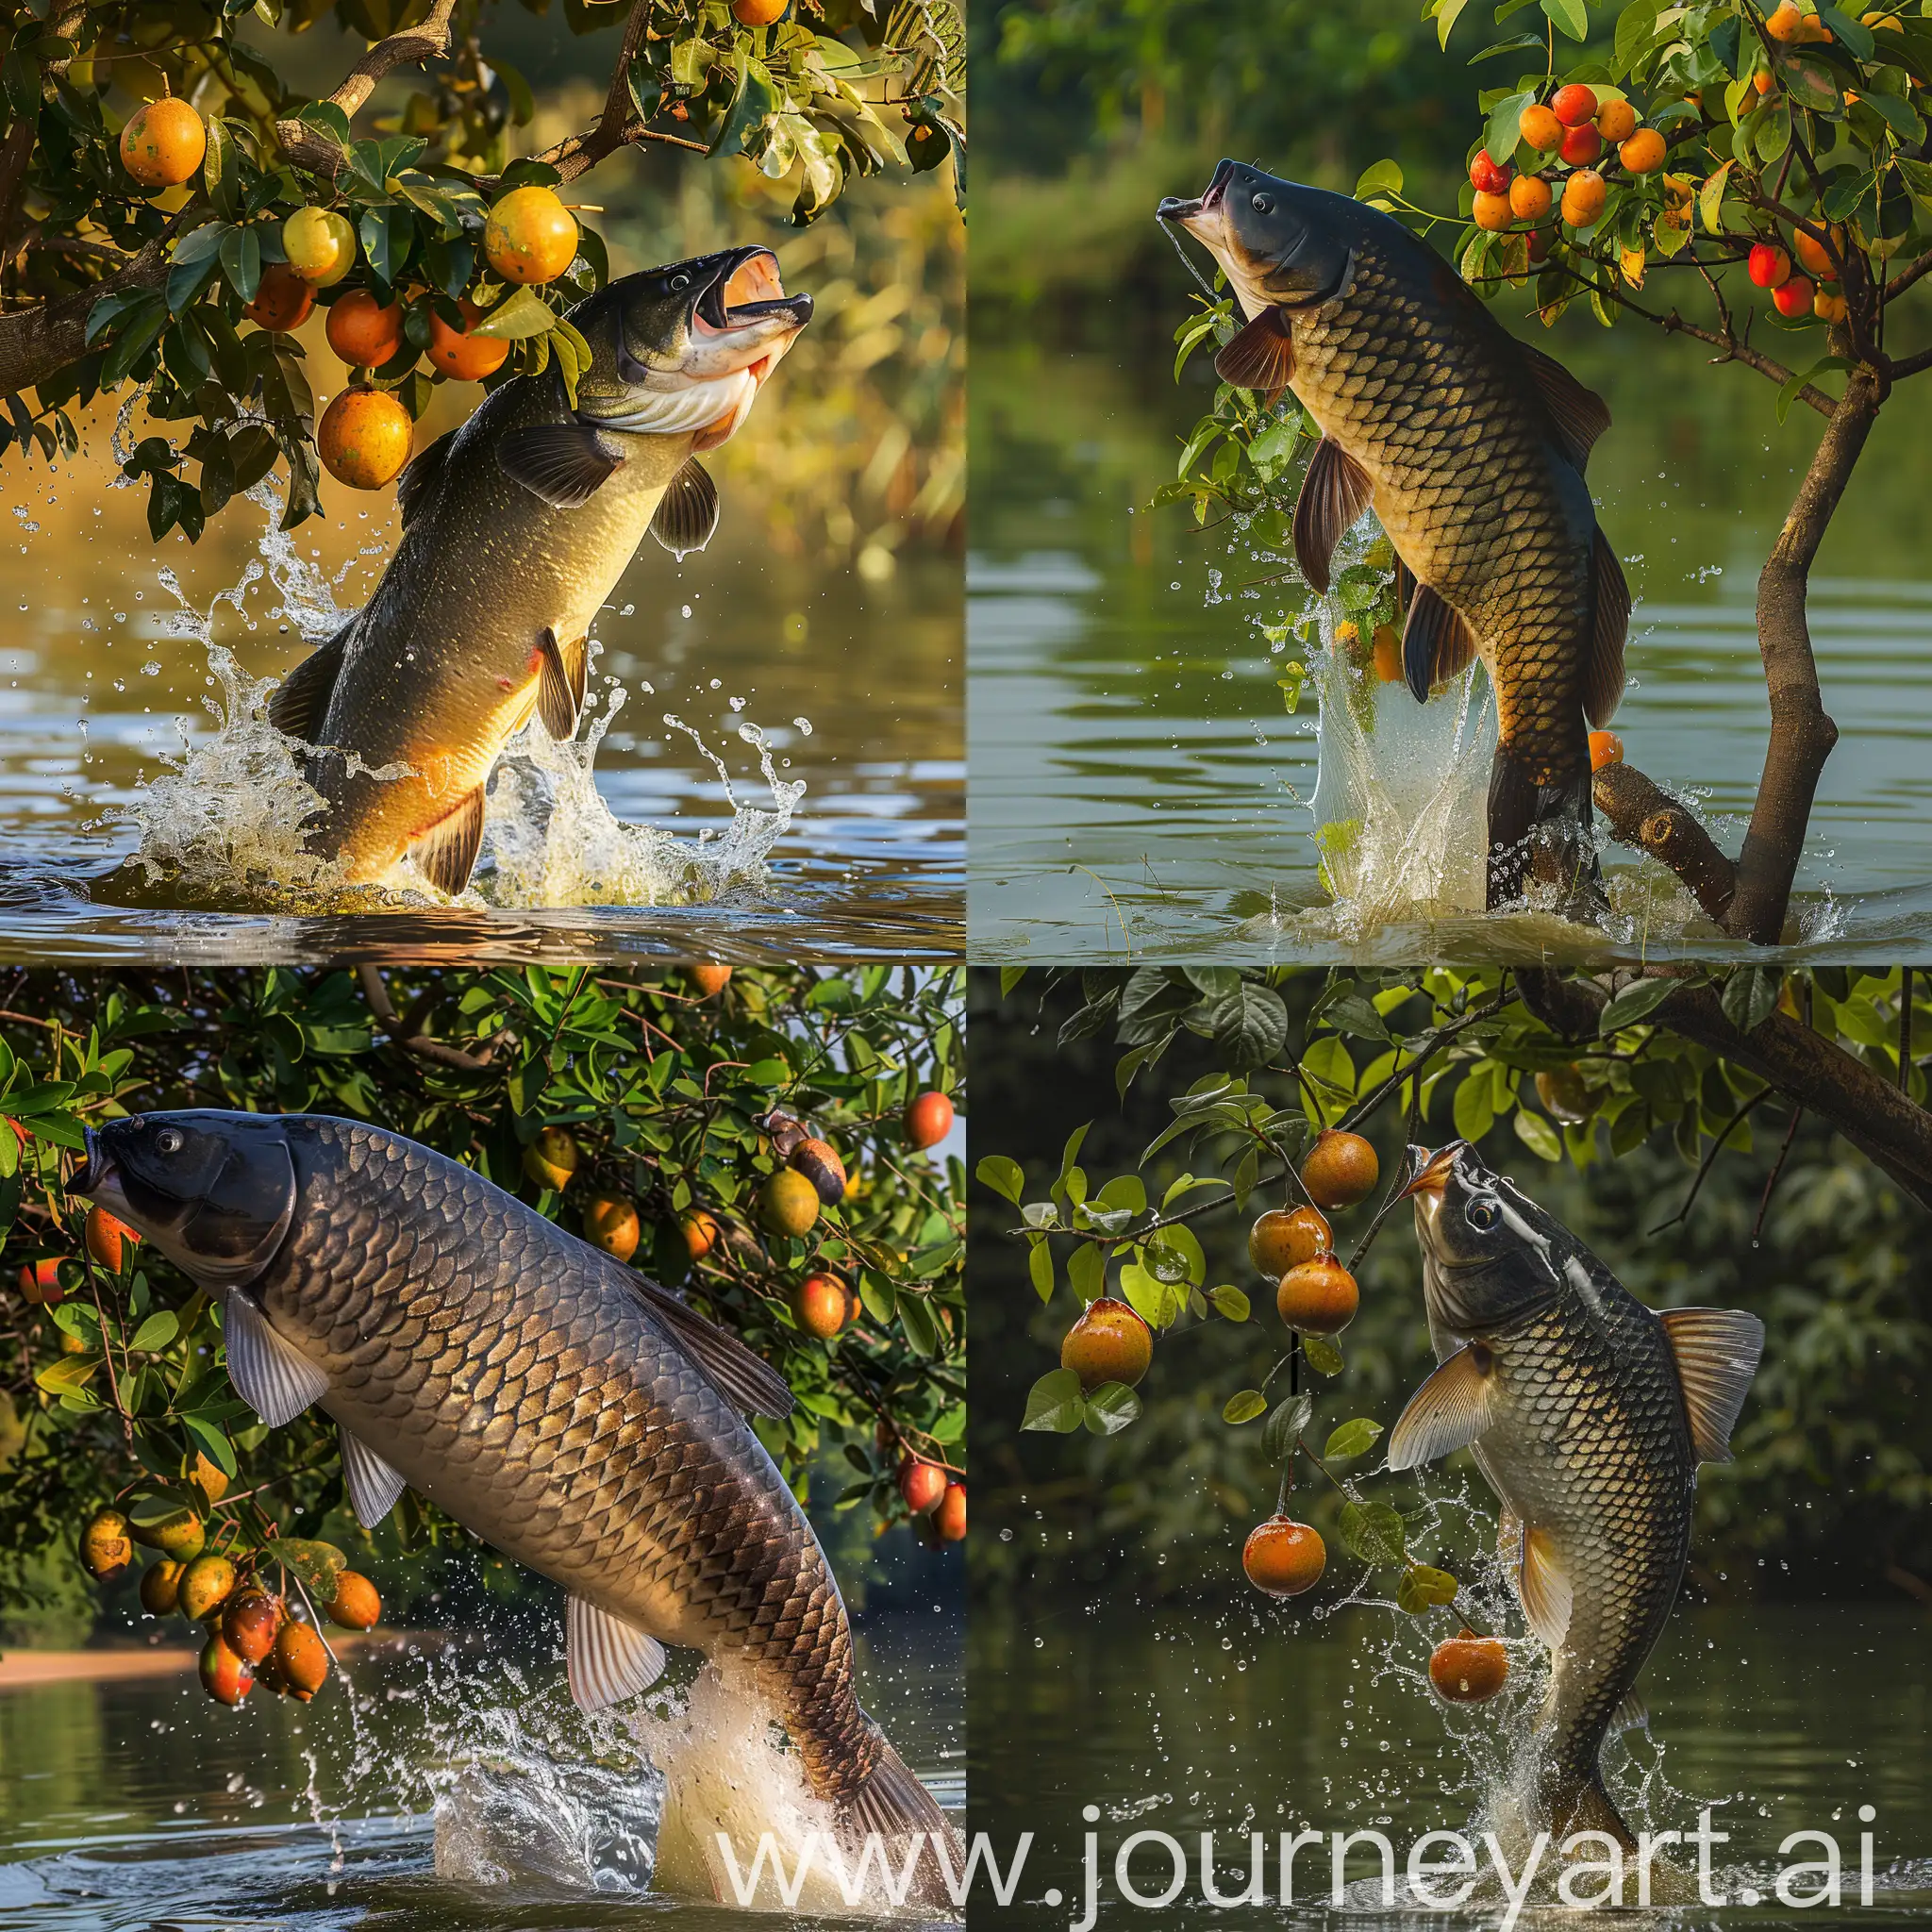 a large channa micropeltes fish, with a smooth body, no scales, short and blunt mouth, cylindrical body type, long body type, the upper part of the body is black, the lower part of the body is yellowish white, jumps out of the lake, grabs the fruit from the tree on the bank of the lake. water splash. Realistic photography 